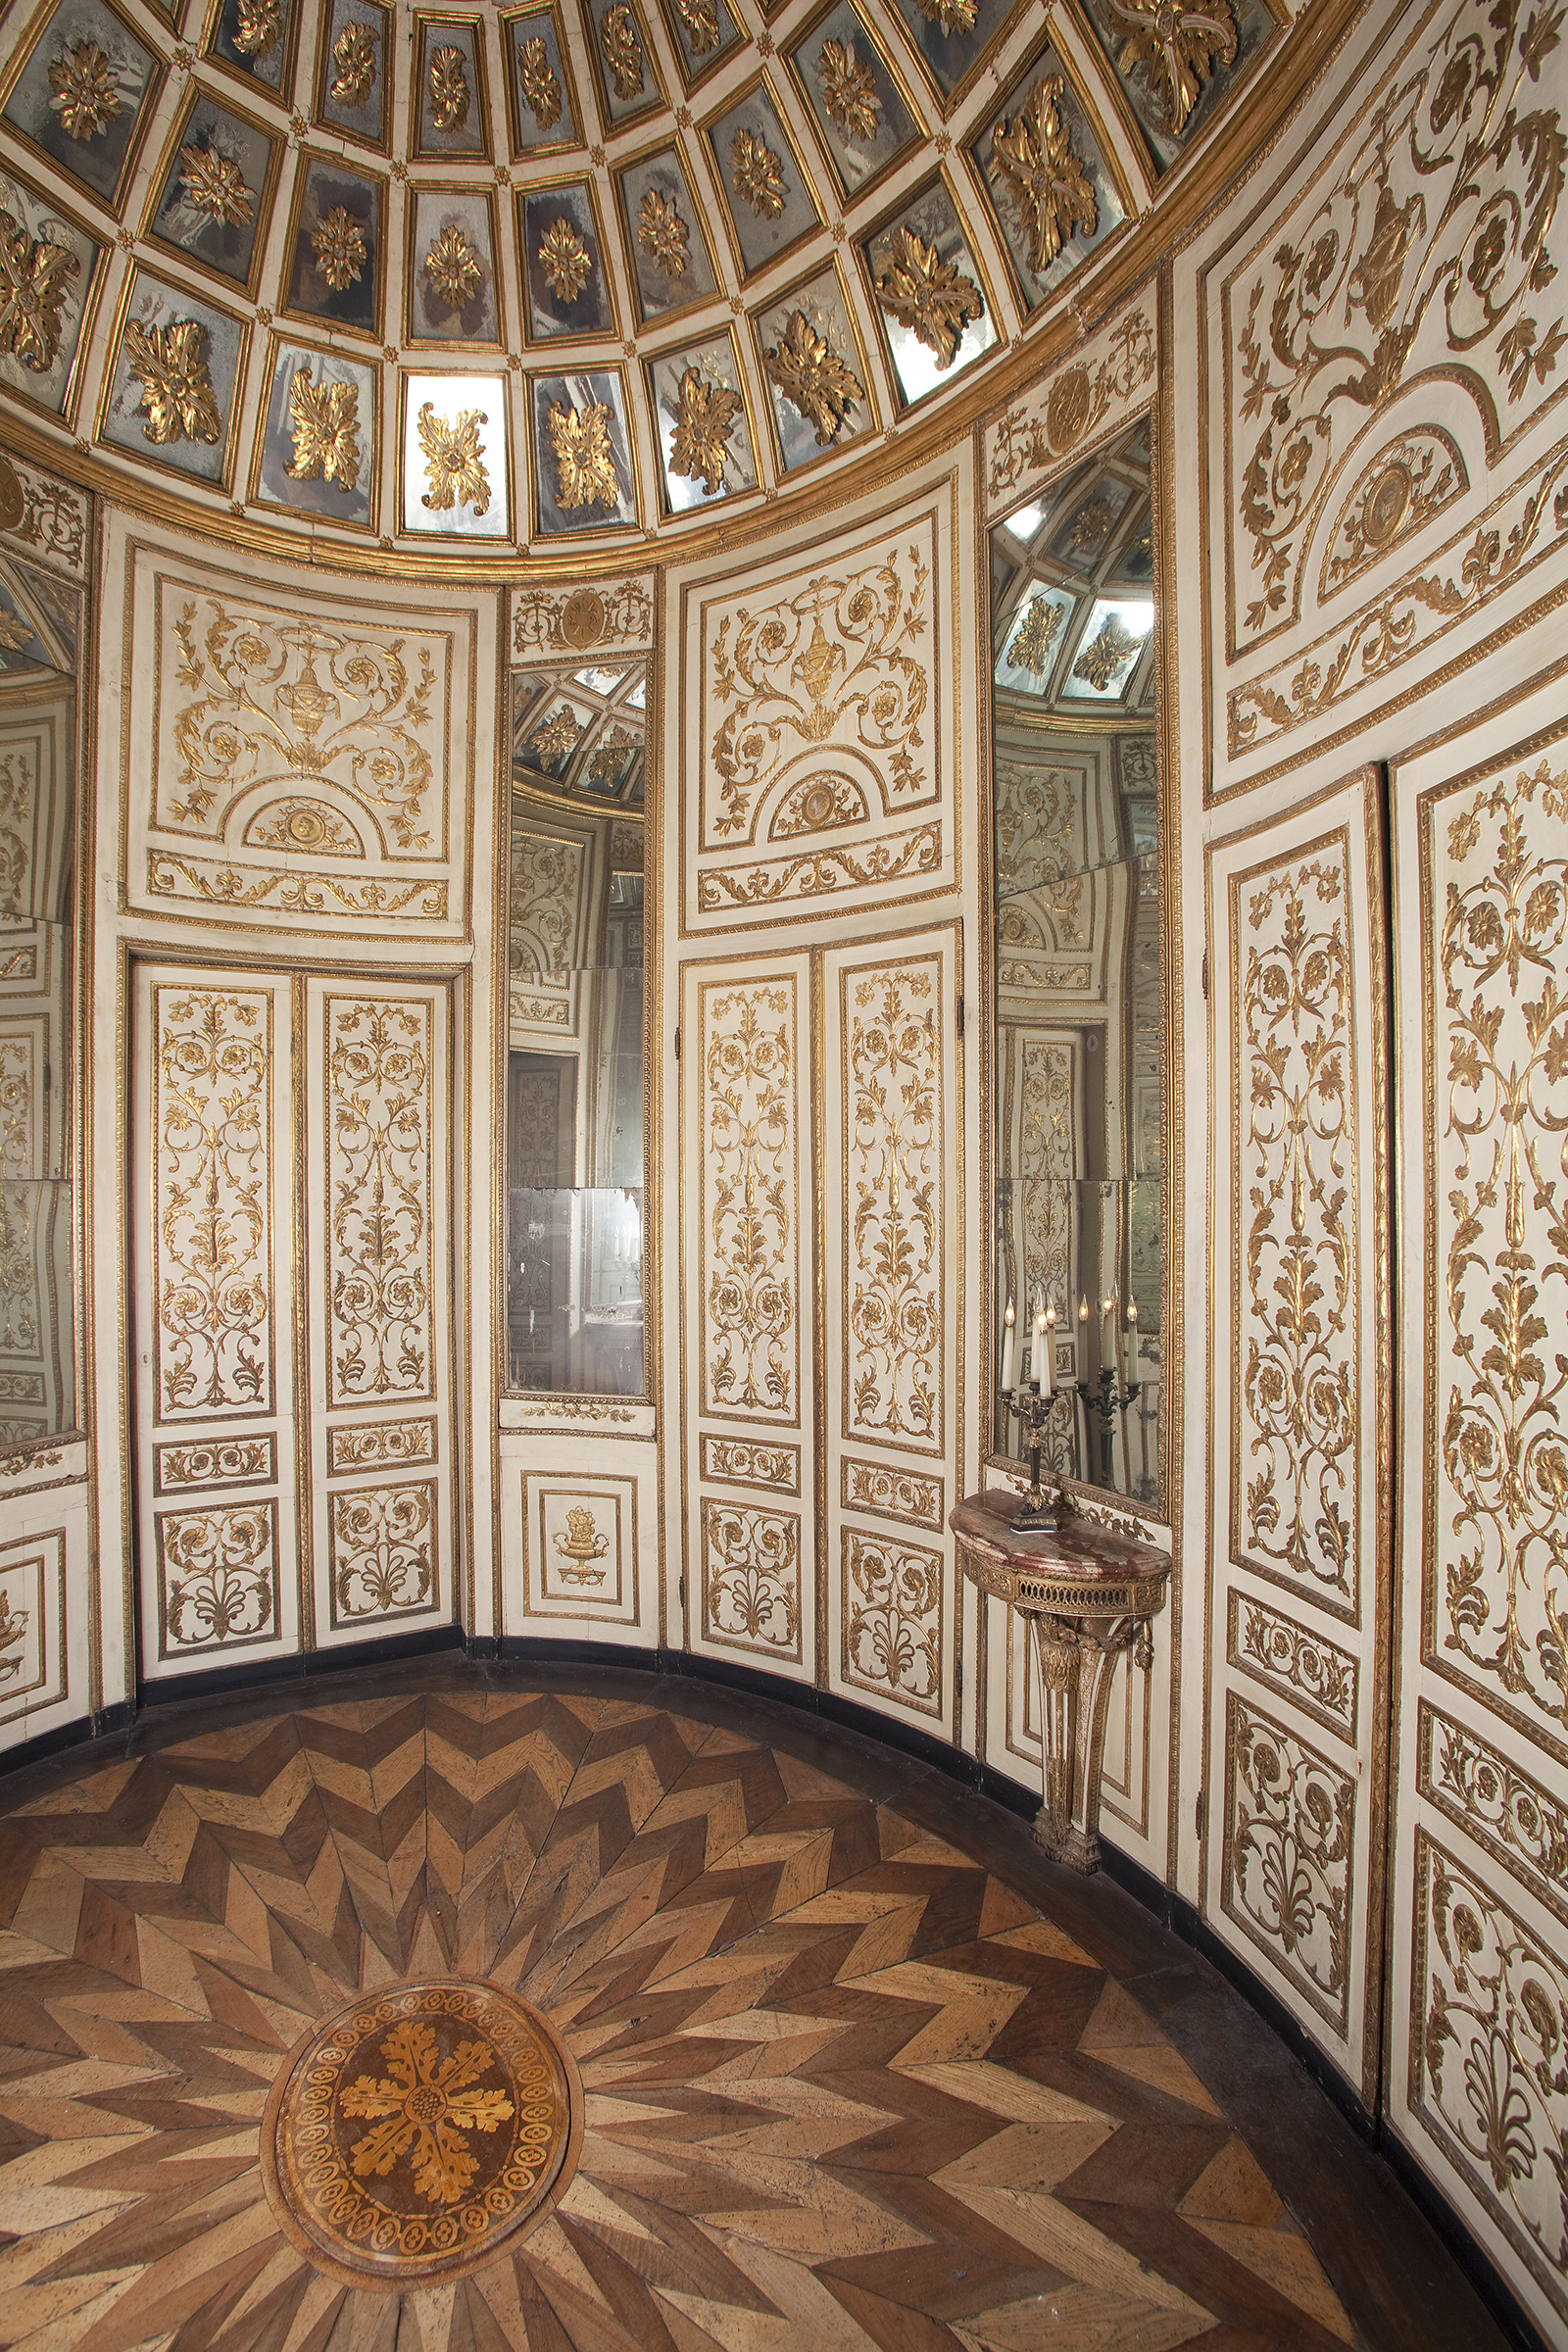 Mirrored room, about 1780-90, Italy (probably Lombardy)